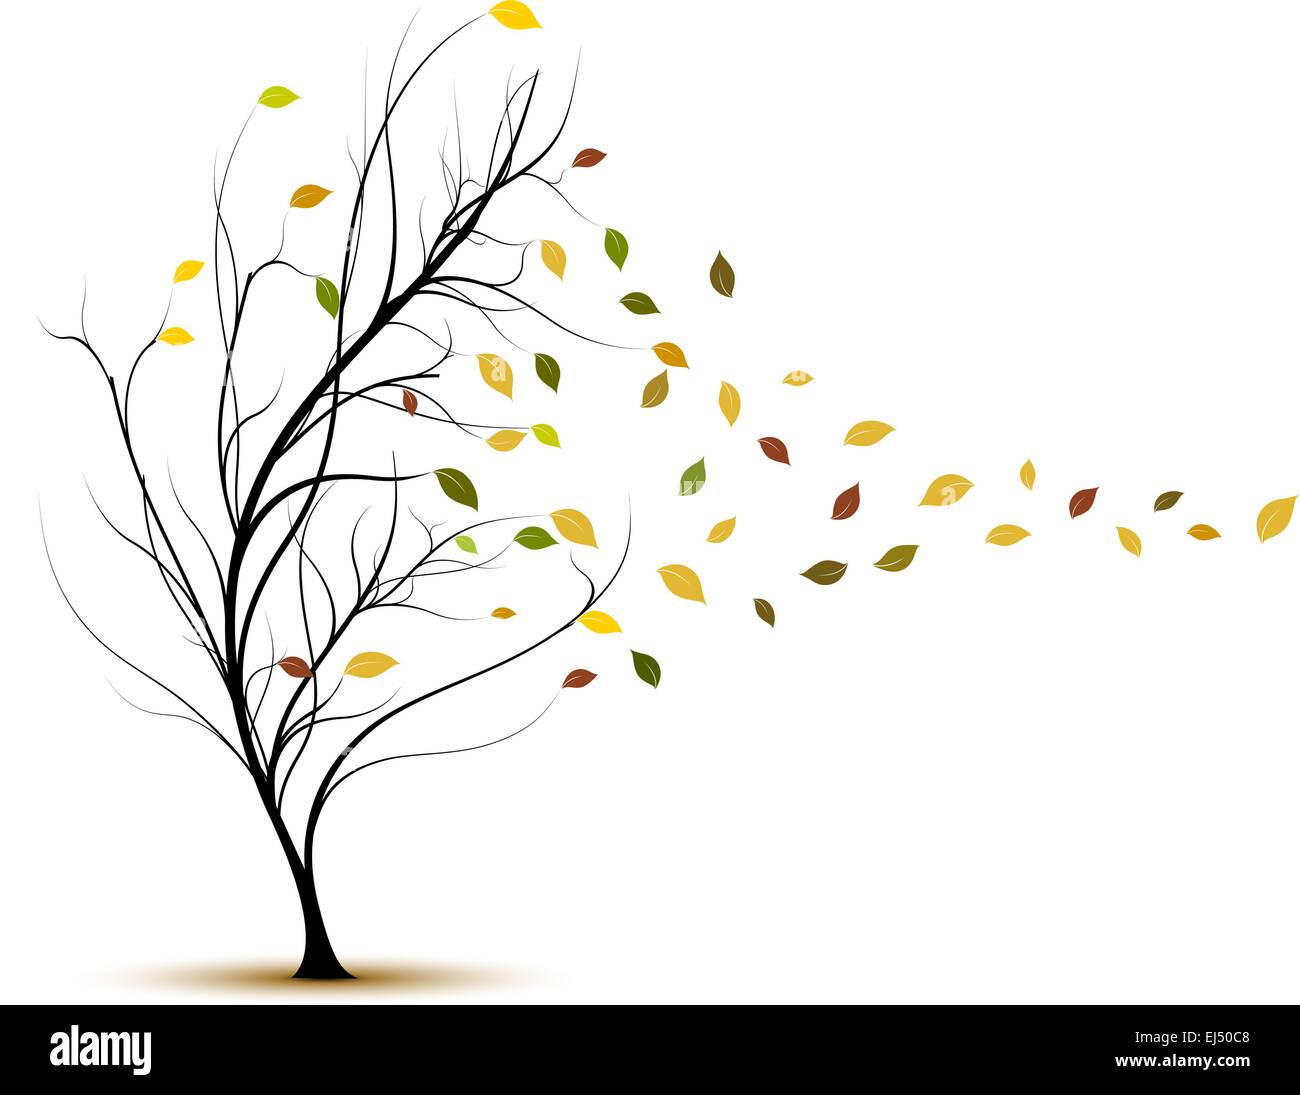 Autumn Leaves. Fall Tree with Wind Blows. Stock Vector